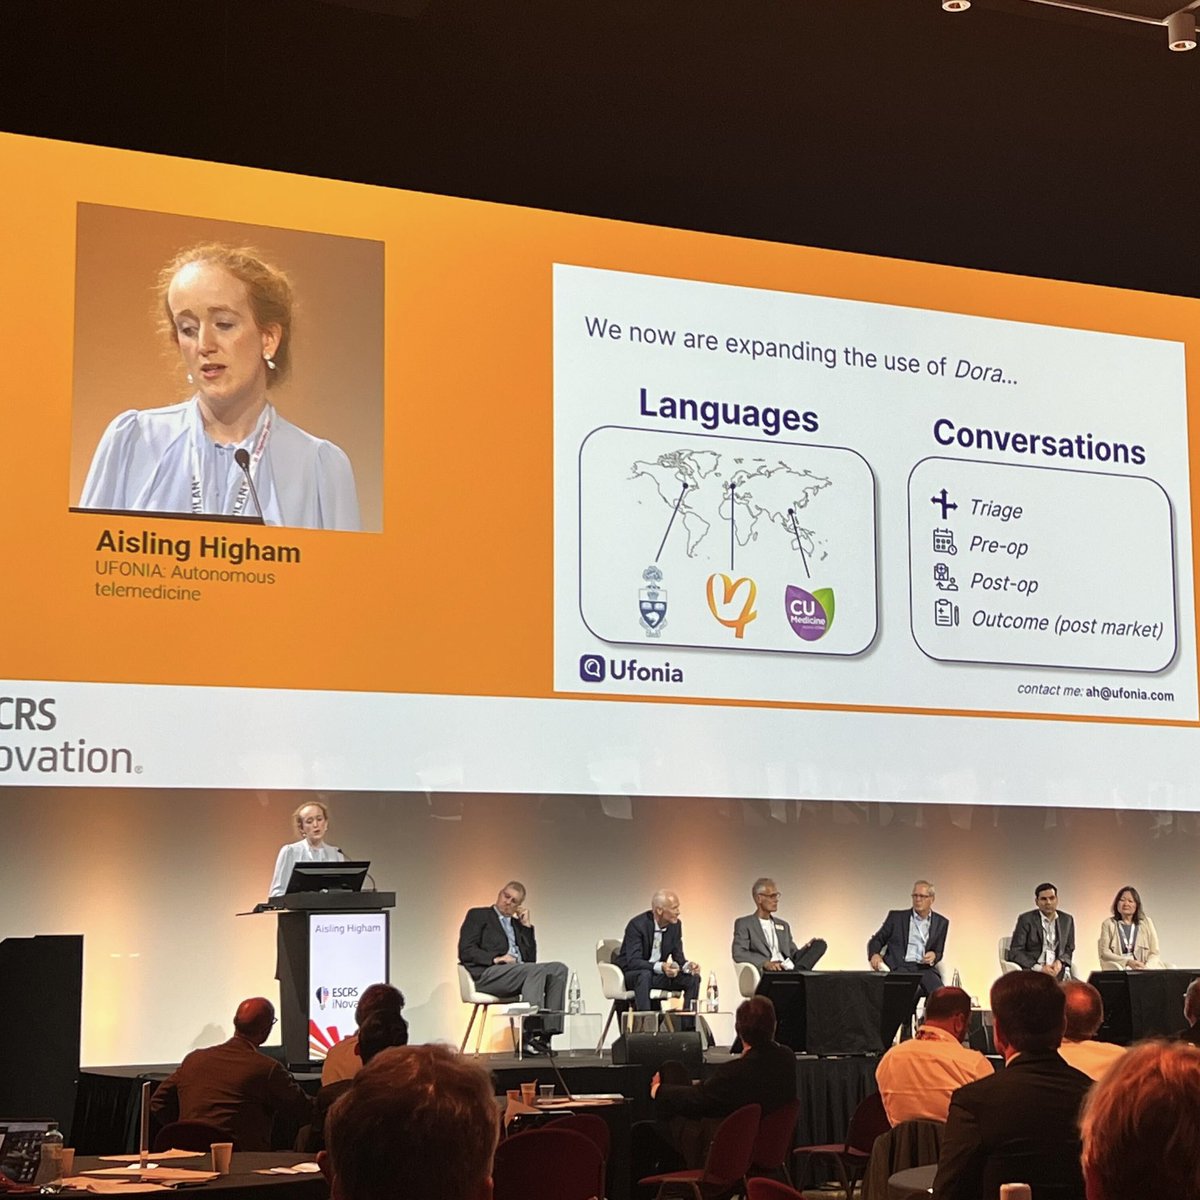 Amazing to see all the engagement from international clinical colleagues with our Associate Medical Director, @AislingHigham, who presented our work on today’s panel session discussing the 5 year future of digital practice in Ophthalmology at @ESCRSofficial #iNovationDay.